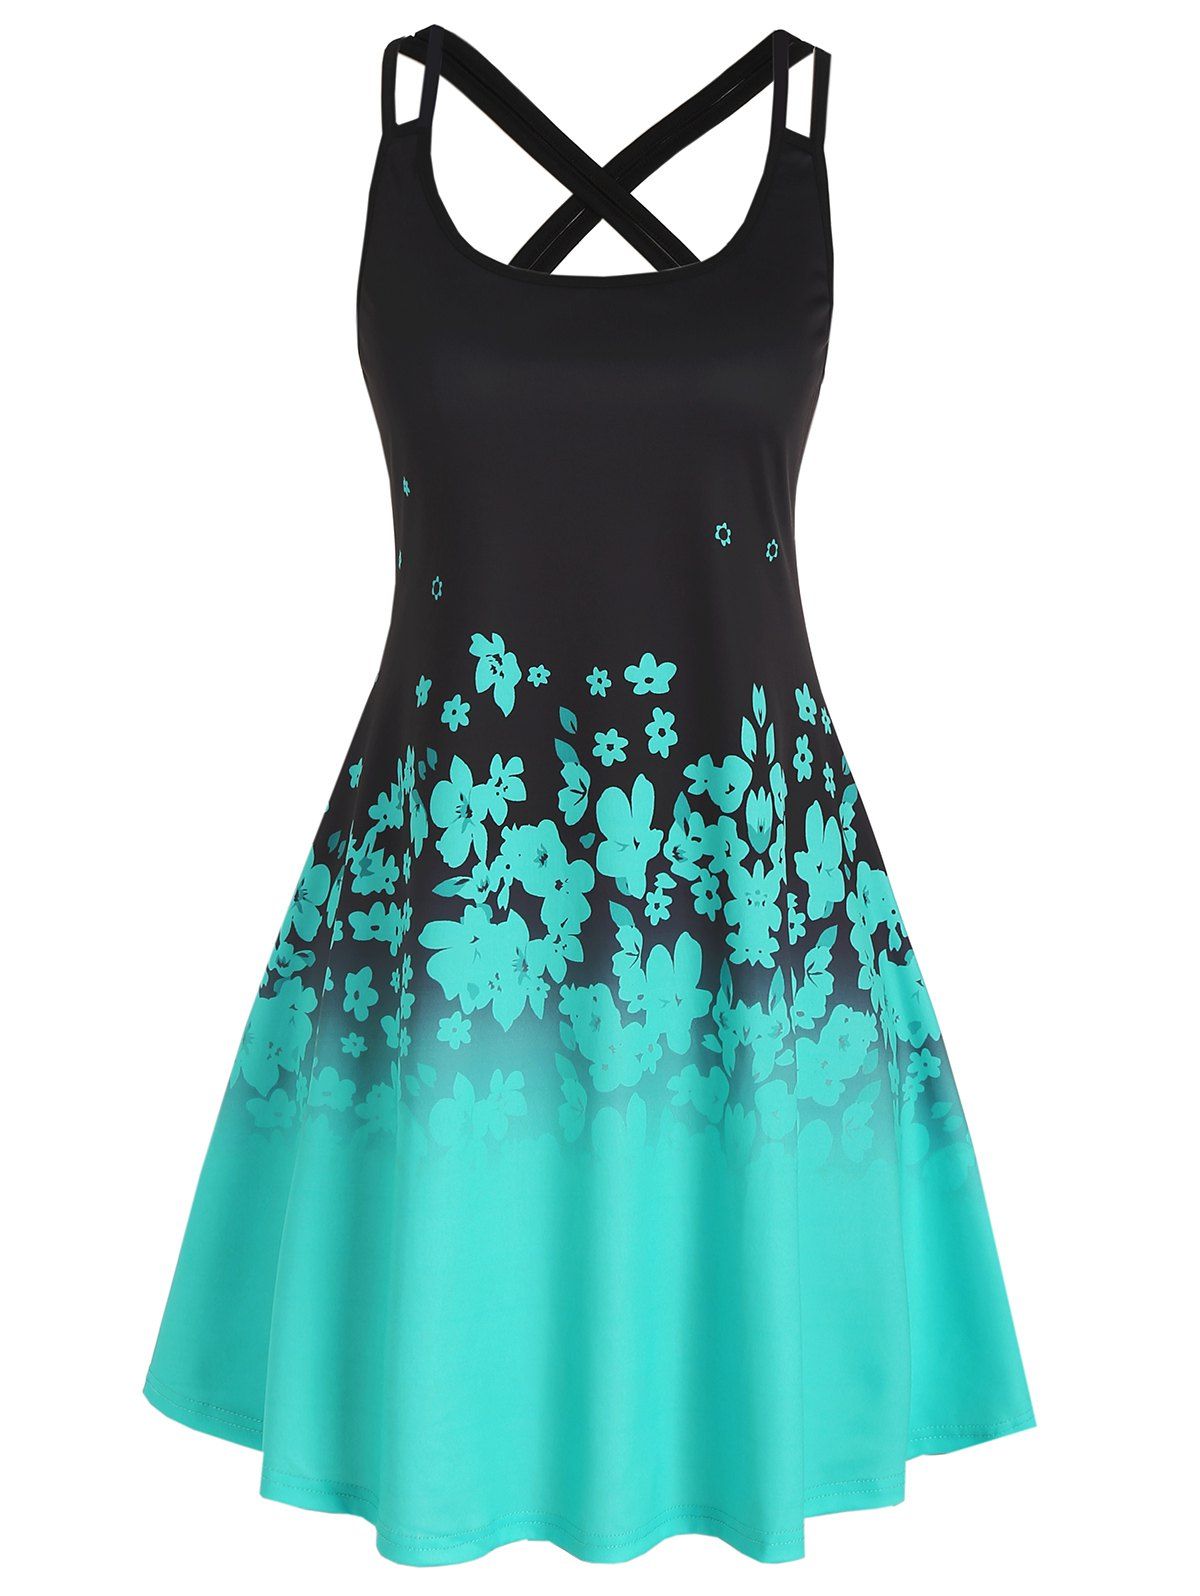 Ombre Floral Print Dress Strappy Cross Back Mini Dress Vacation A Line Dress - GREEN XL